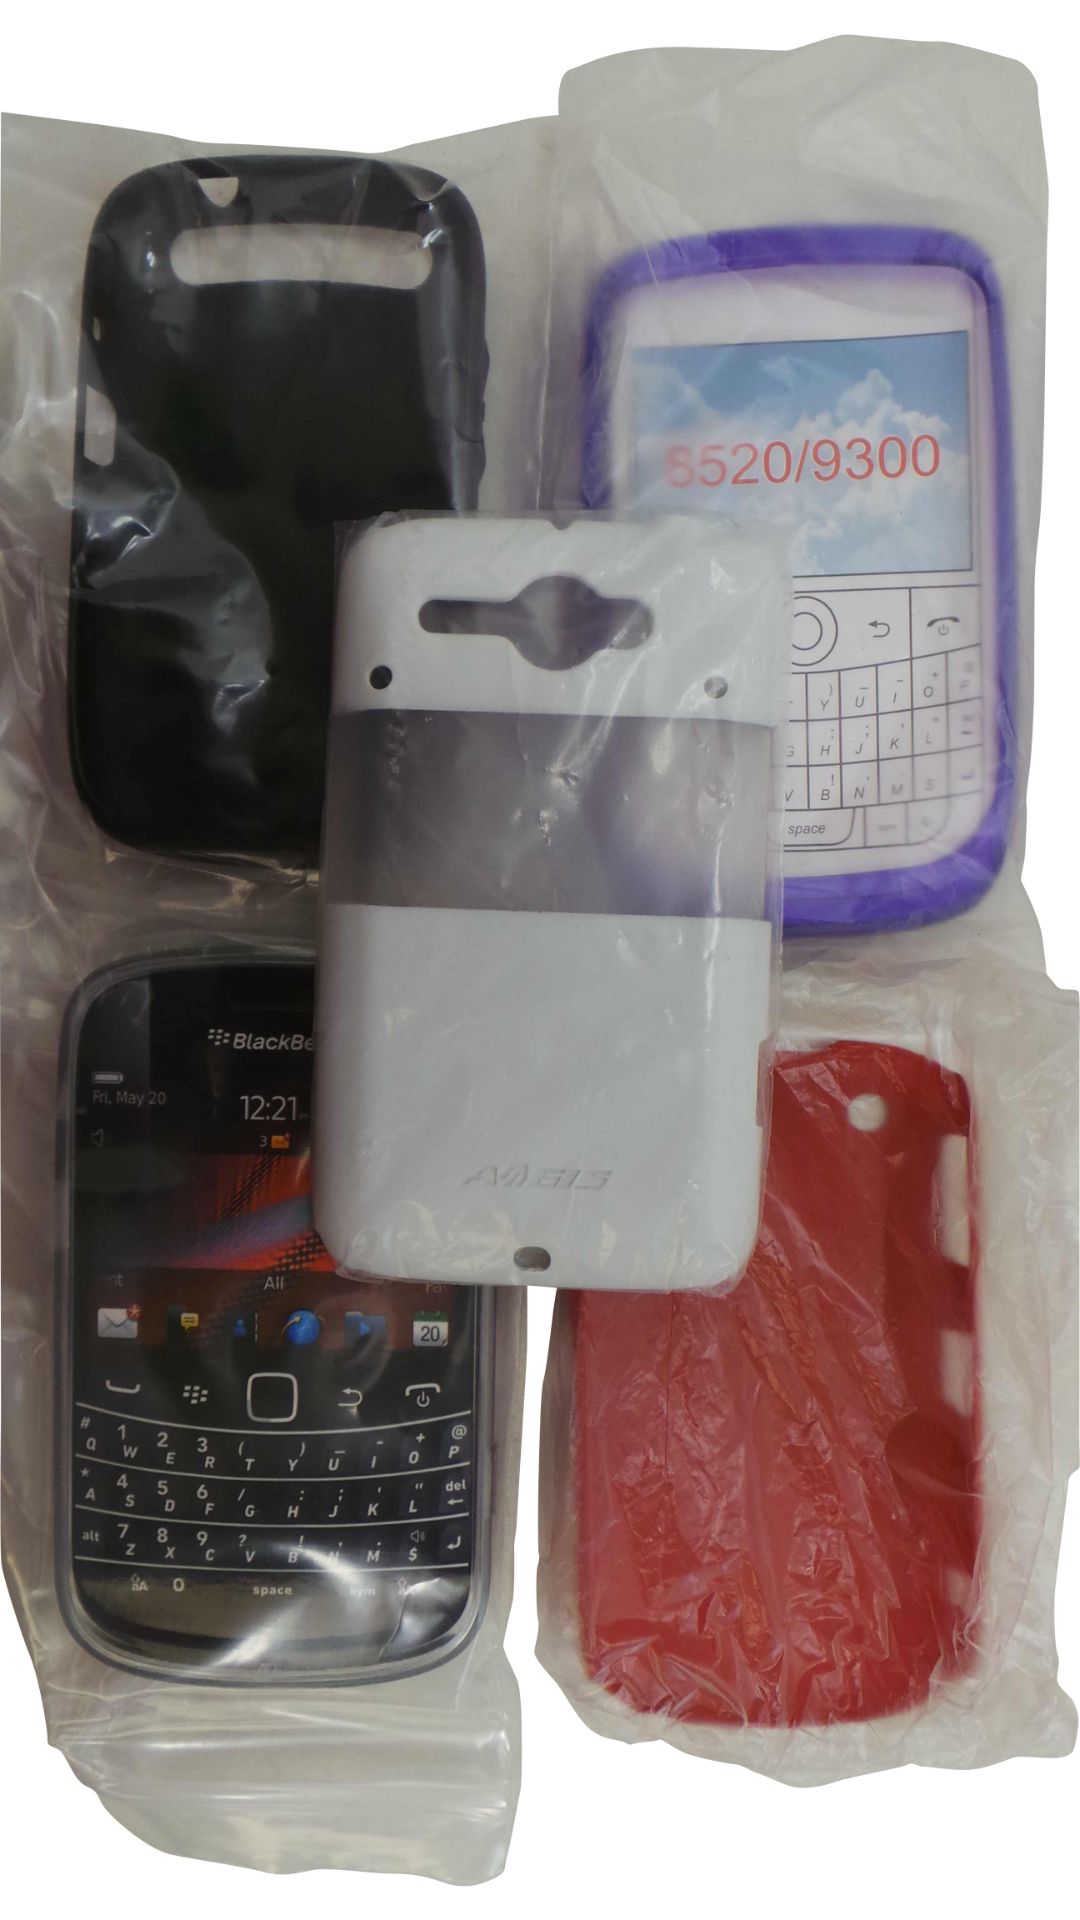 Wholesale Joblot Of 1000 Mobile Phone Cases, Chargers, Screen Savers ETC - Image 9 of 23